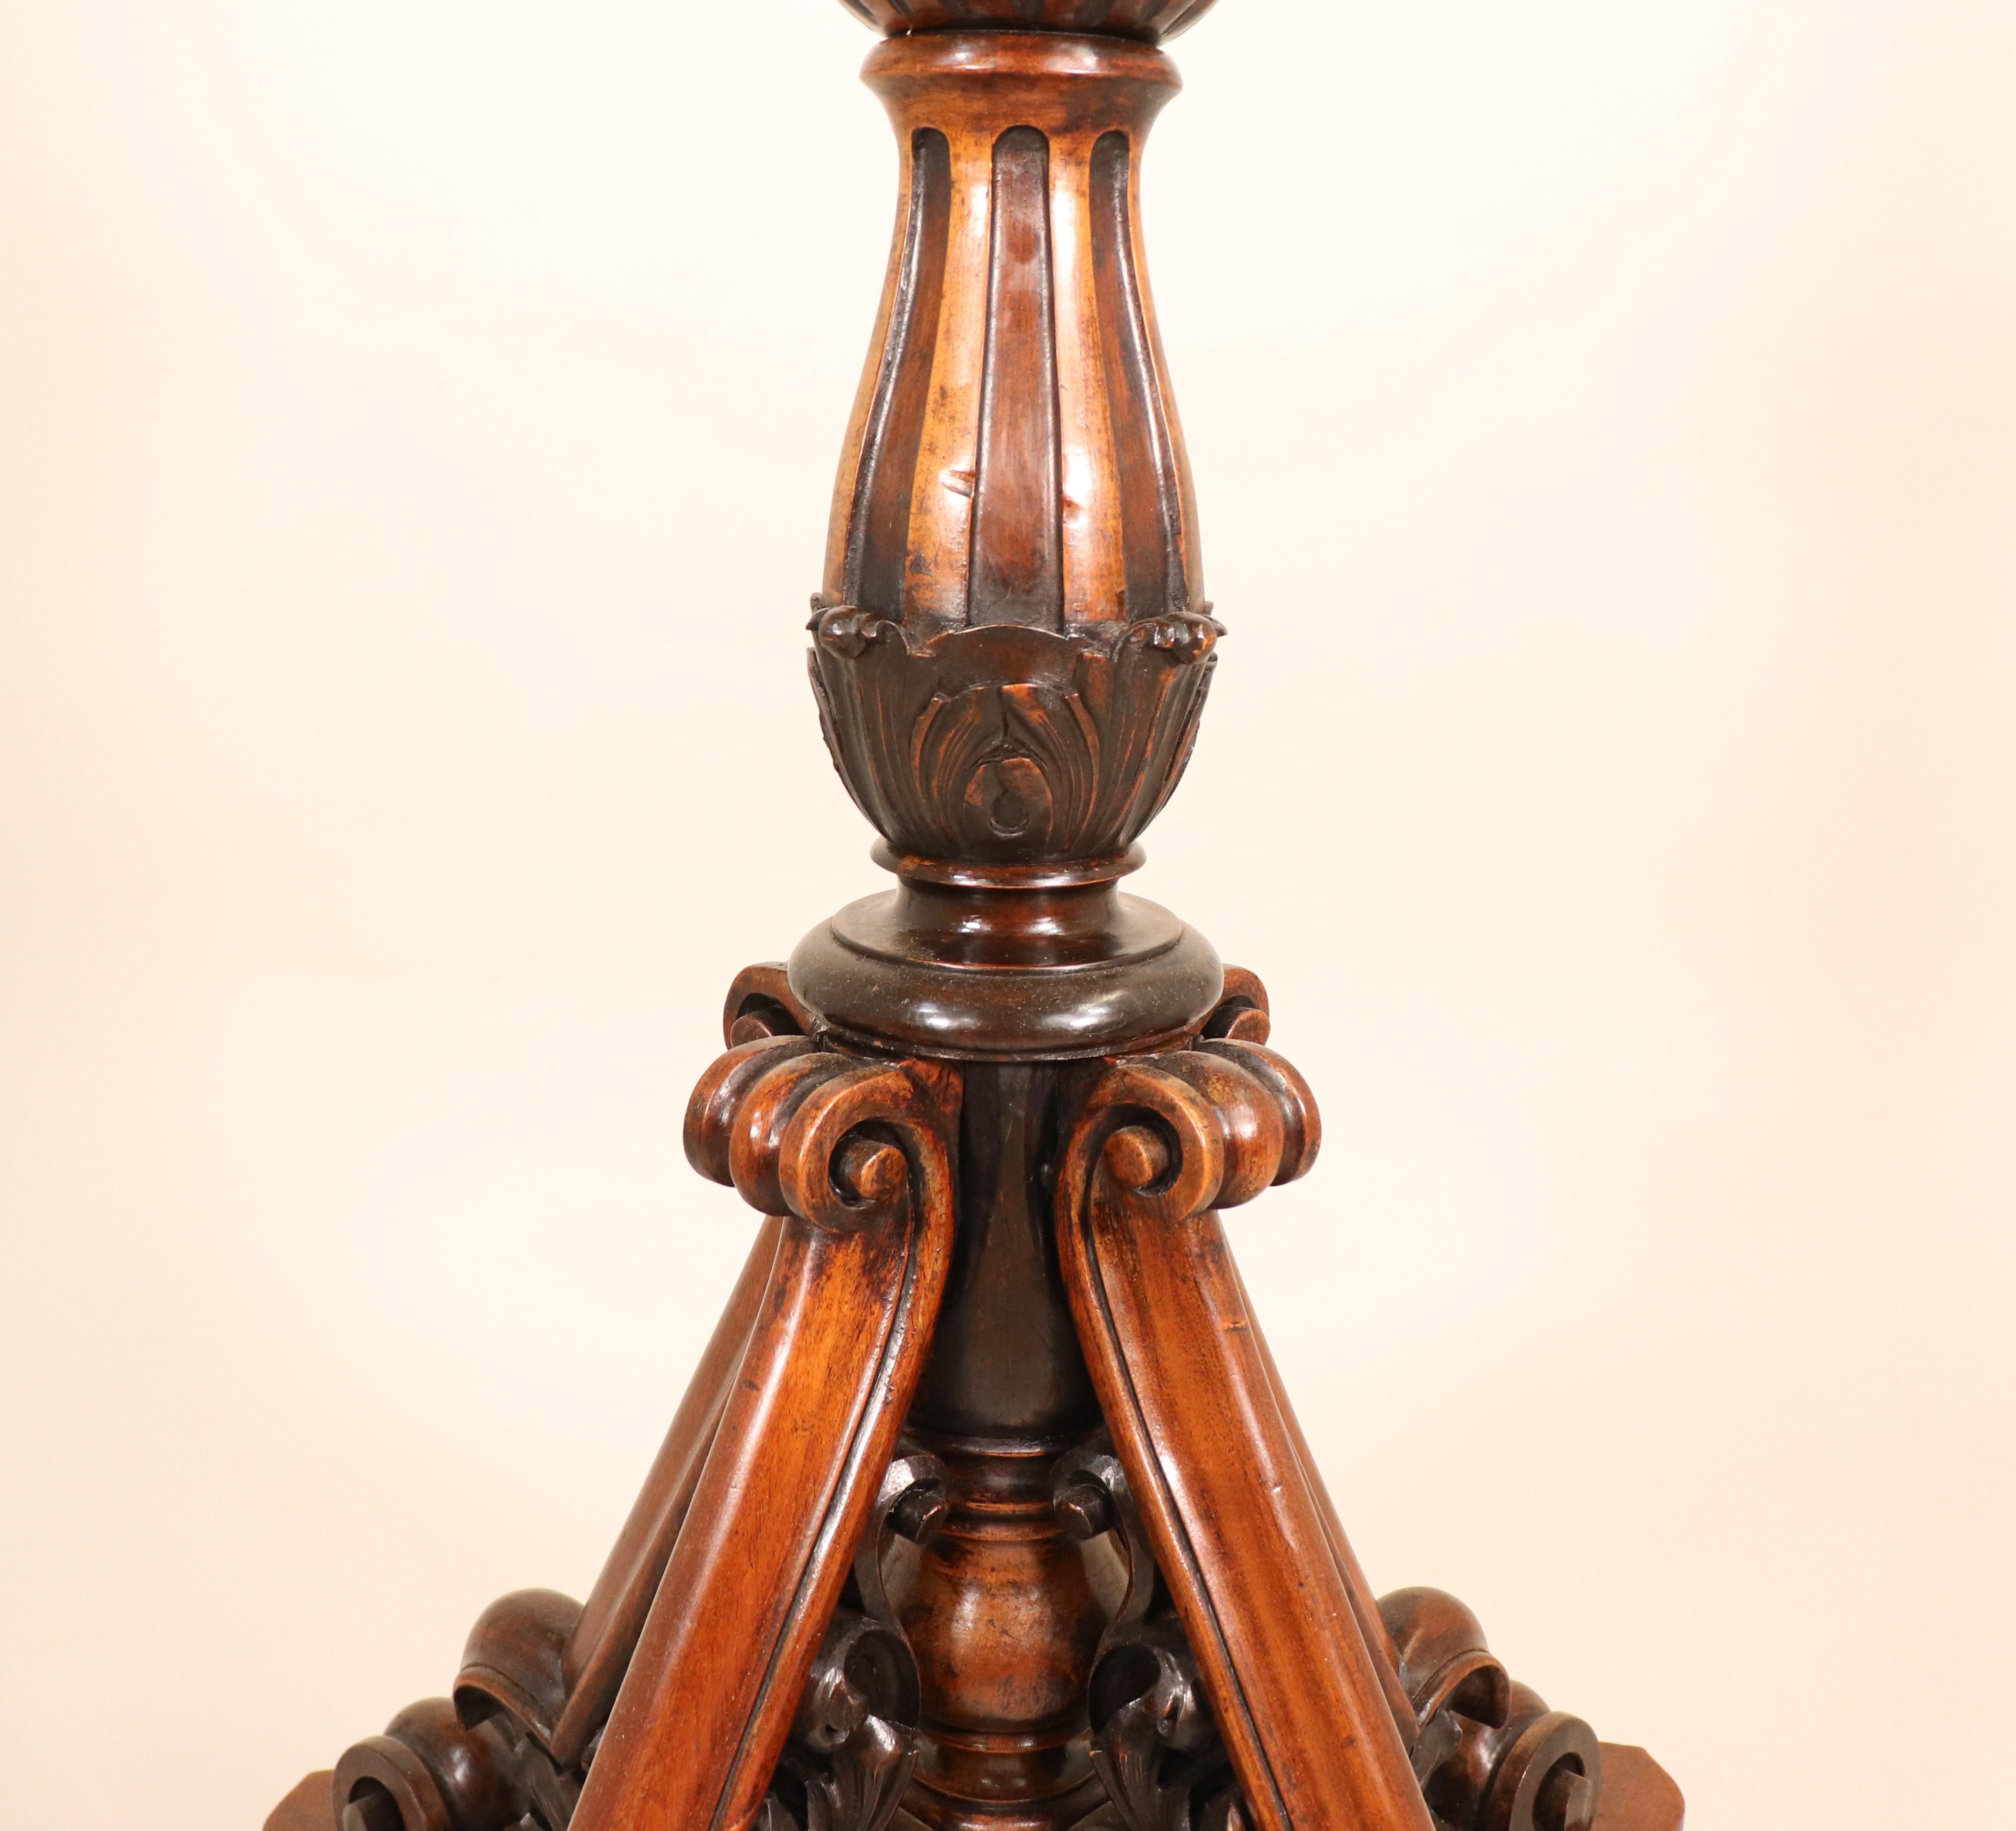 Stained Glass Late 19th Century French Renissance Revival Hand Carved Walnut Floor Lamp For Sale